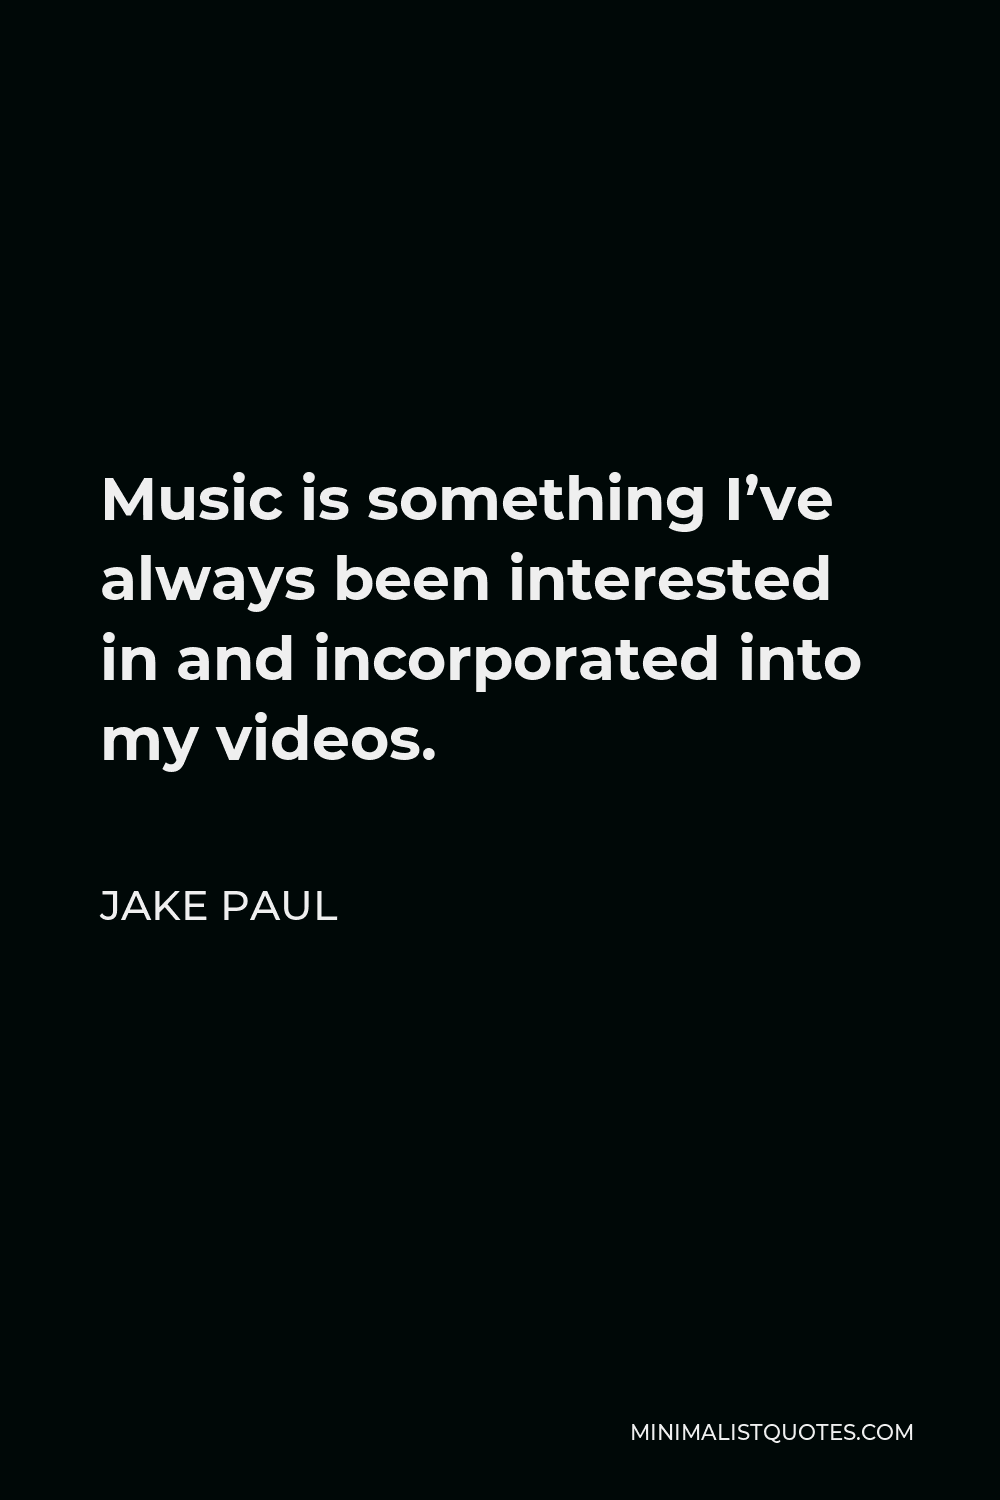 Jake Paul Quote - Music is something I’ve always been interested in and incorporated into my videos.